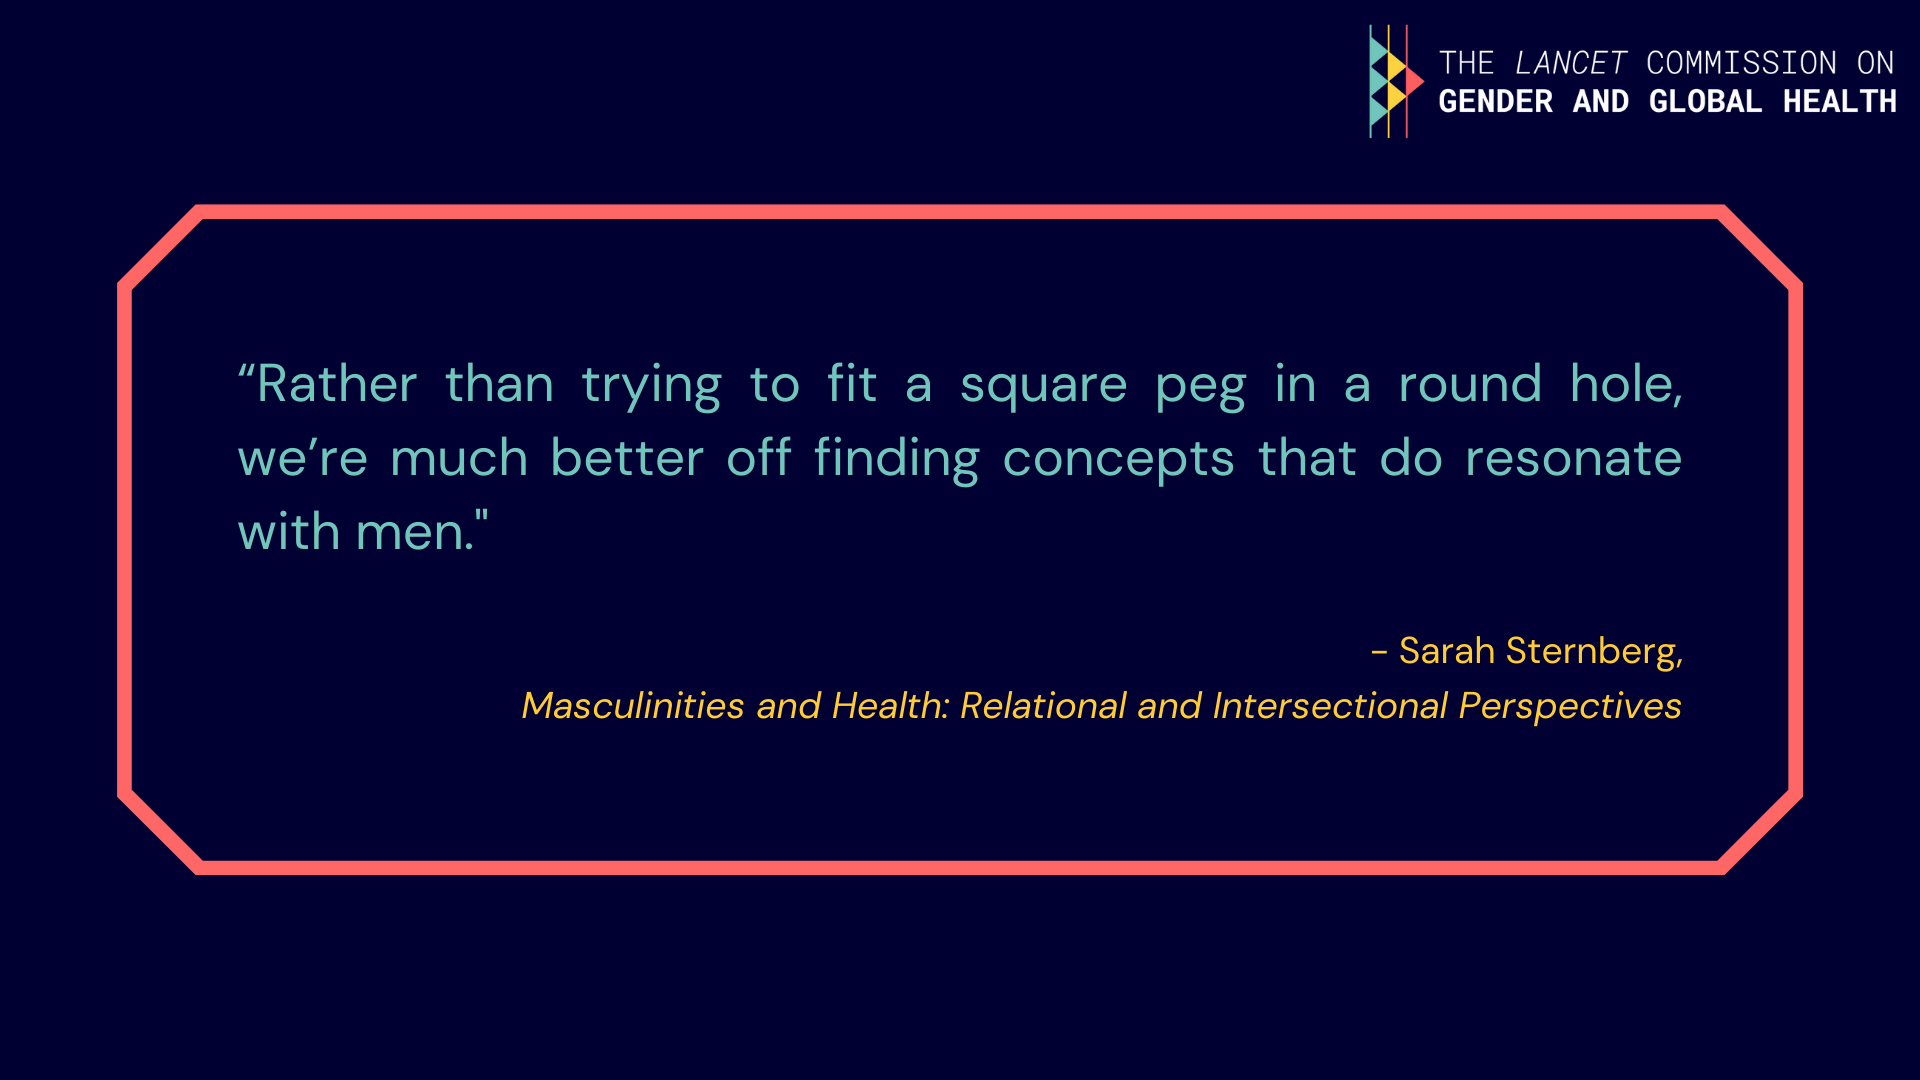 Sarah Sternberg: "Rather than trying to fit a square peg in a round hole, we're much better off finding concepts that do resonate with men".